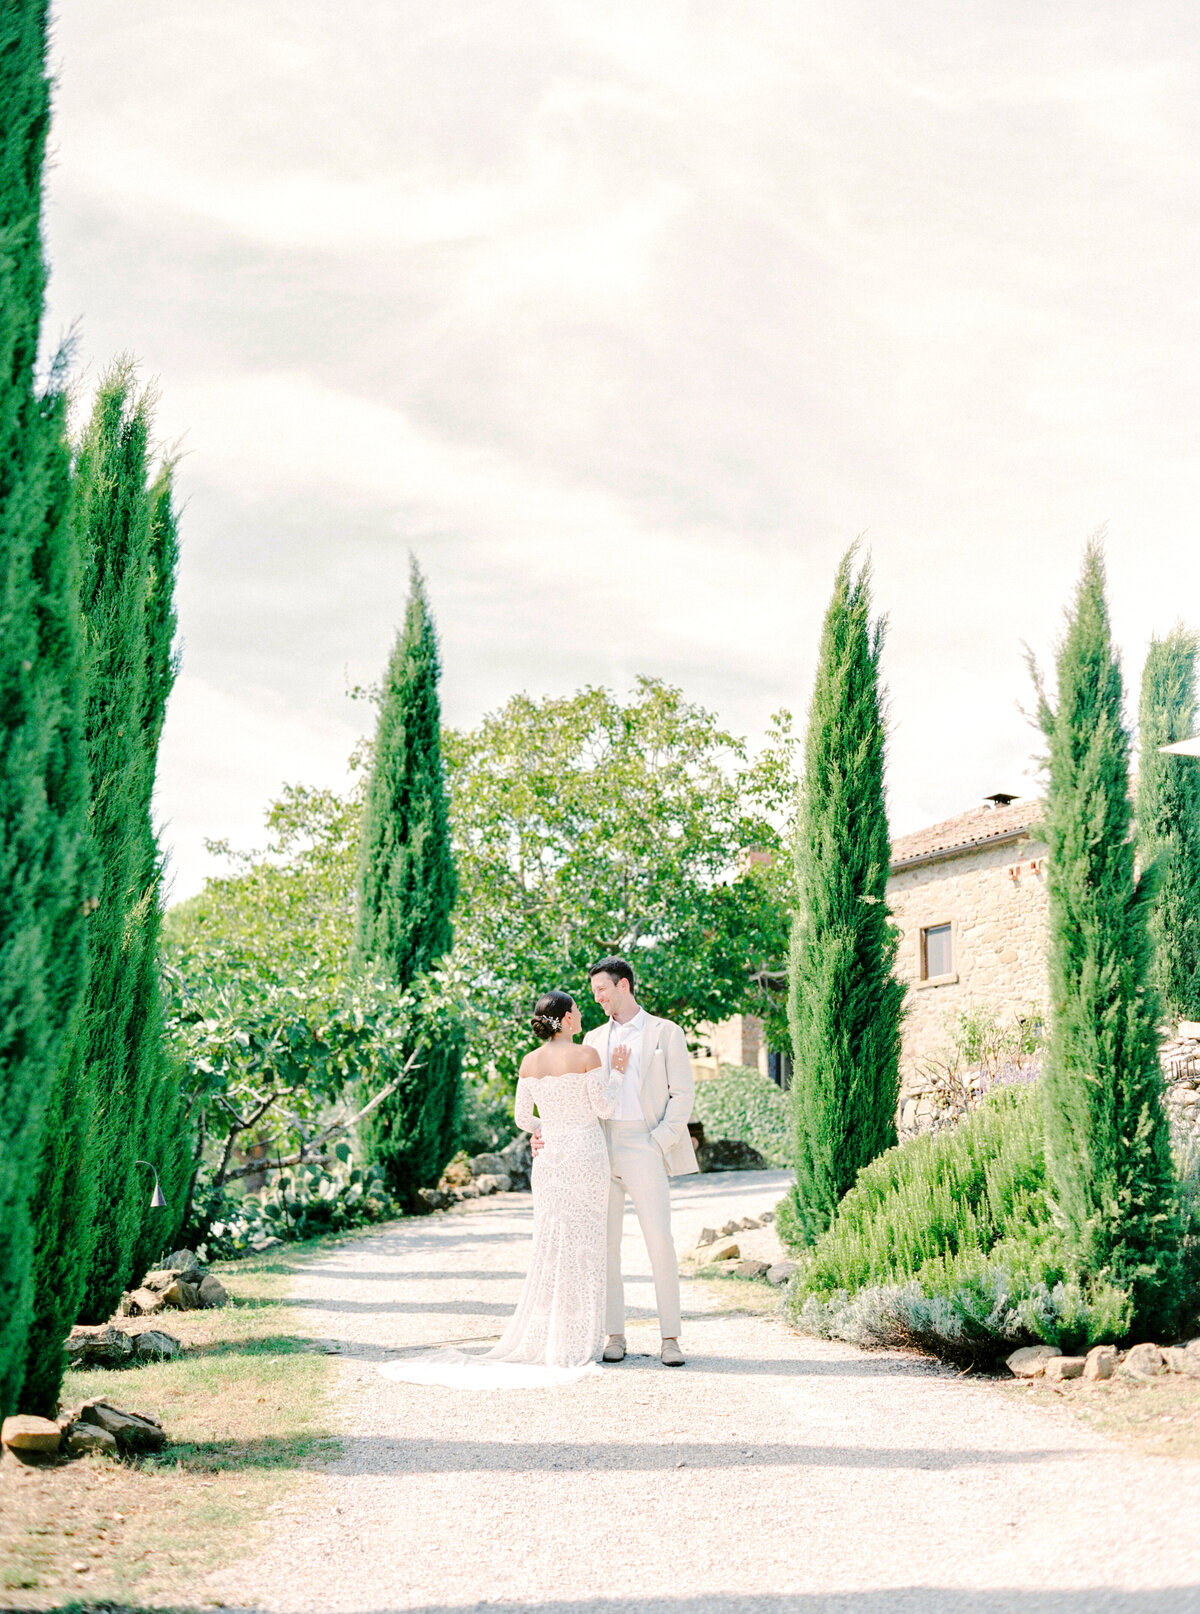 Film photograph of Bride and groom along cypress trees photographed by Italy wedding photographer at Villa Montanare Tuscany wedding